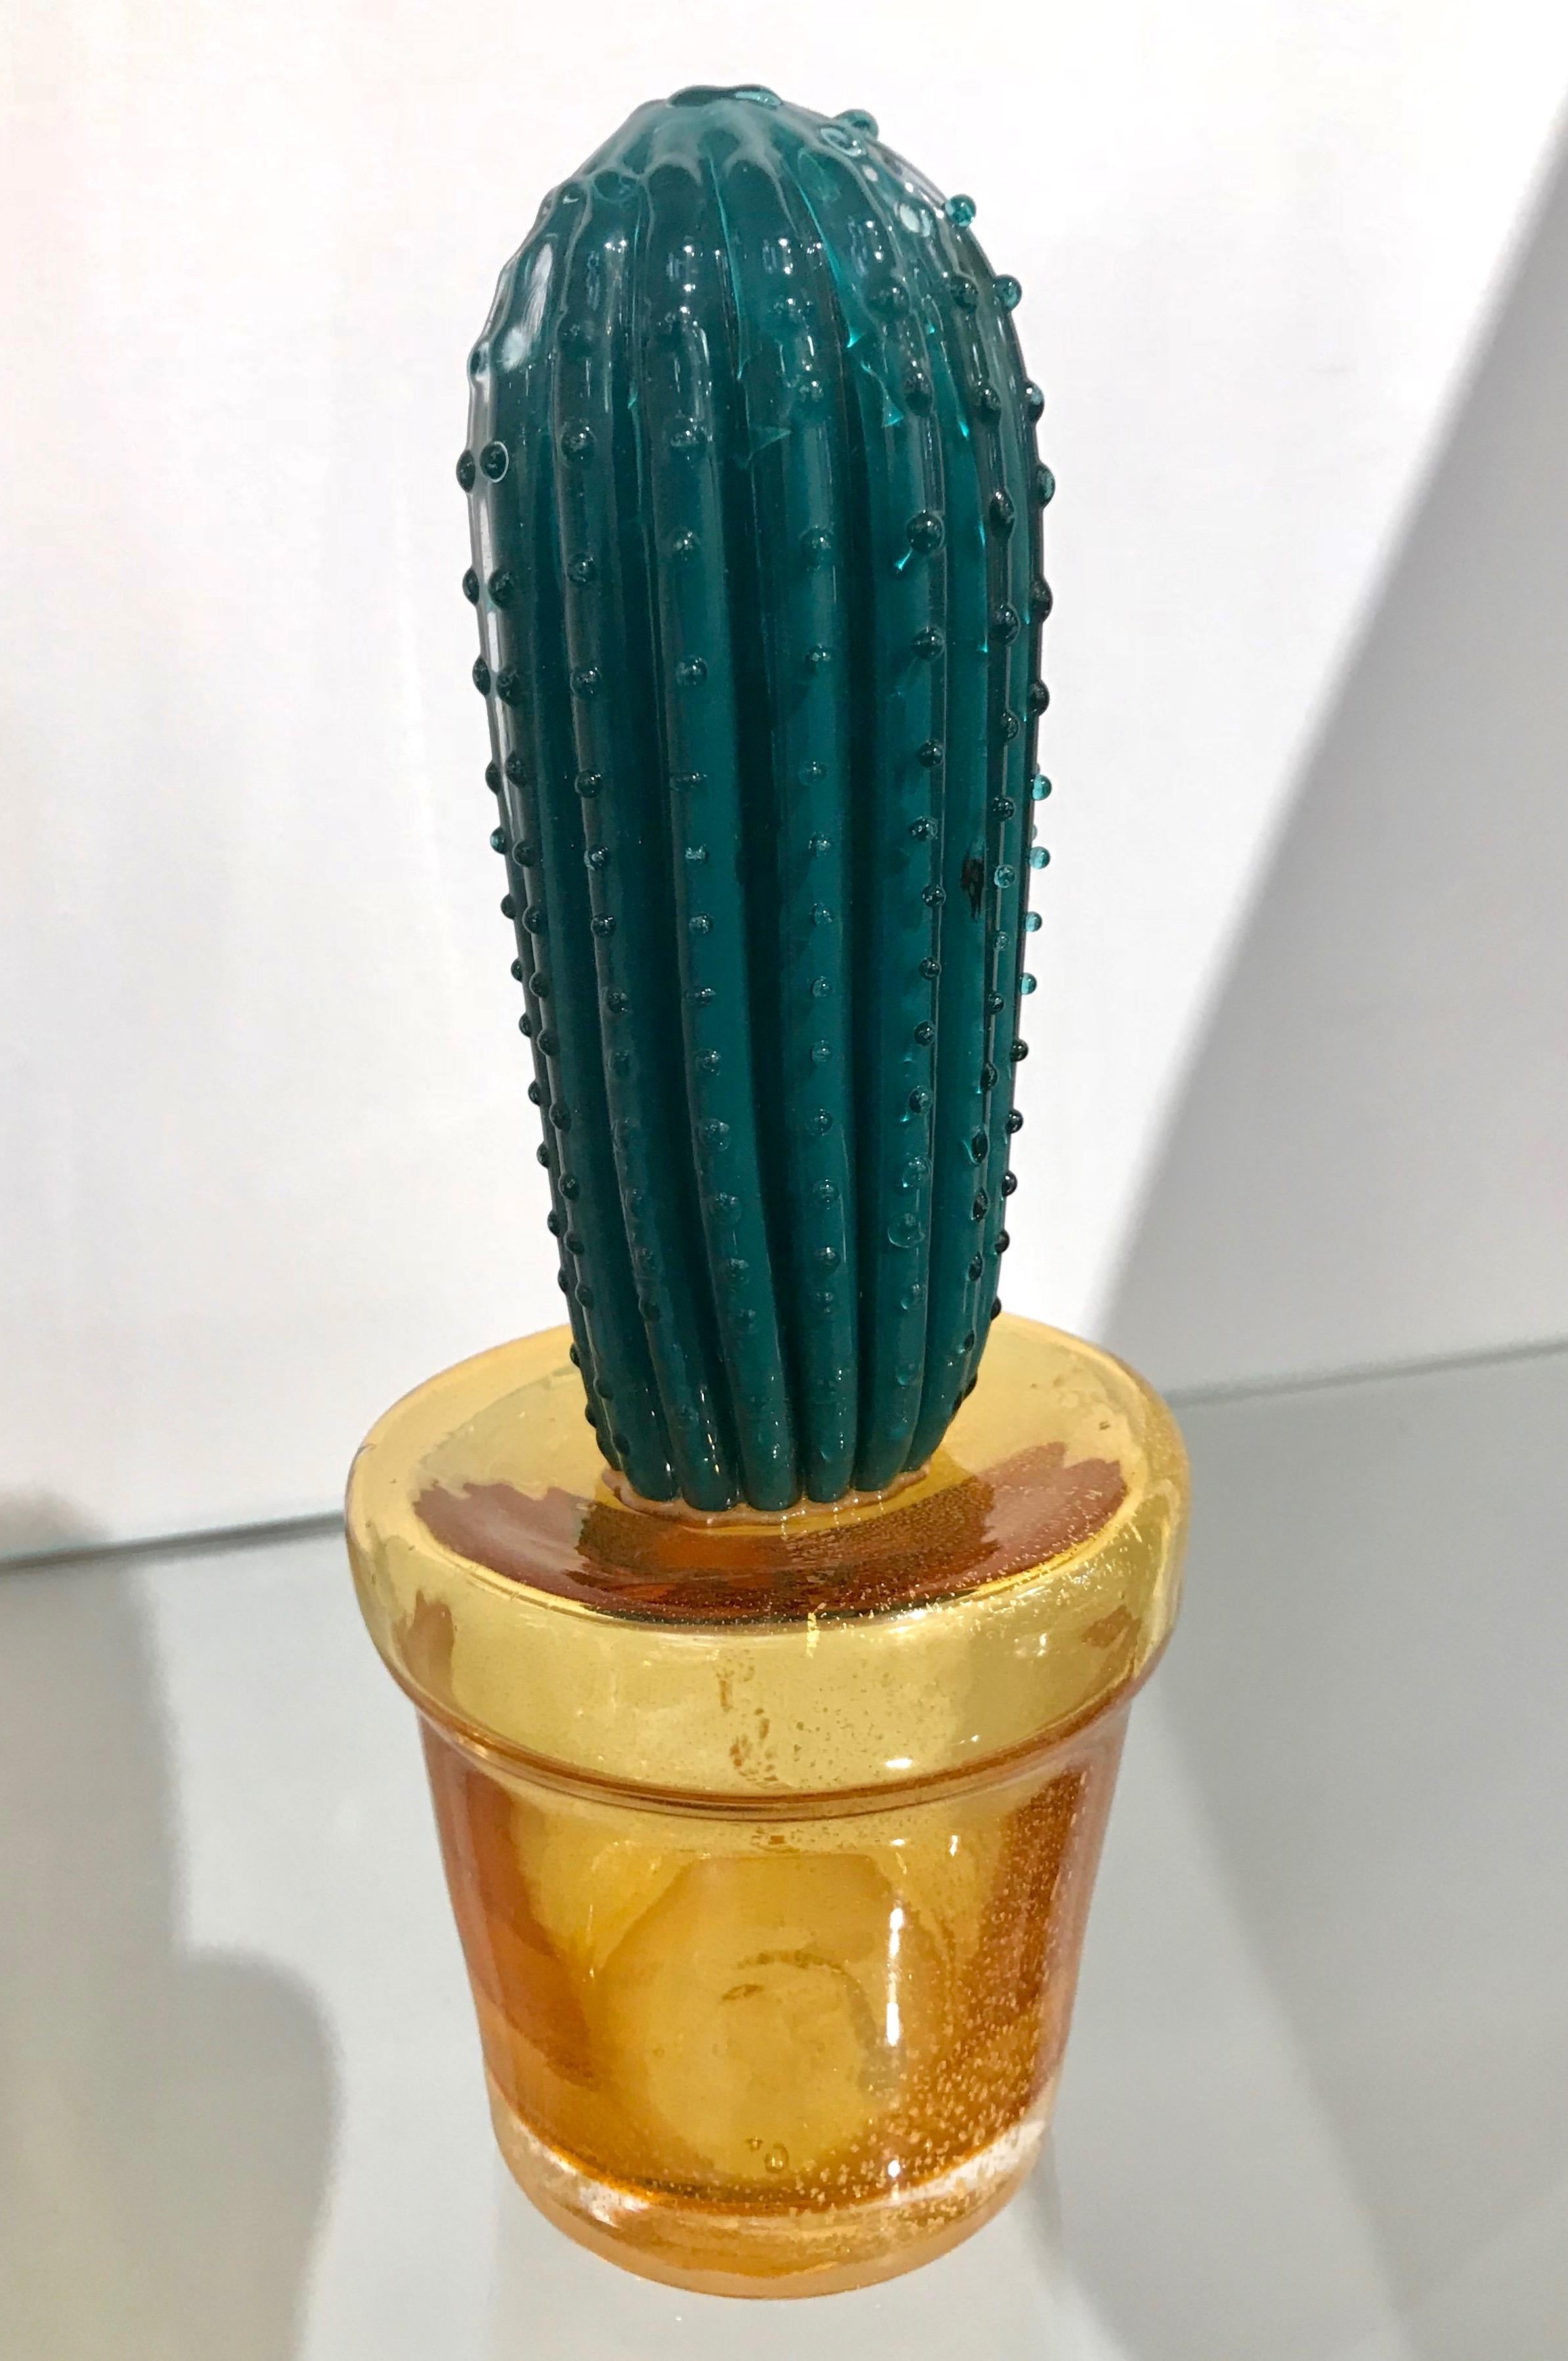 Art Glass 1990s Vintage Italian Teal Green Murano Glass Tall Cactus Plant with Gold Pot